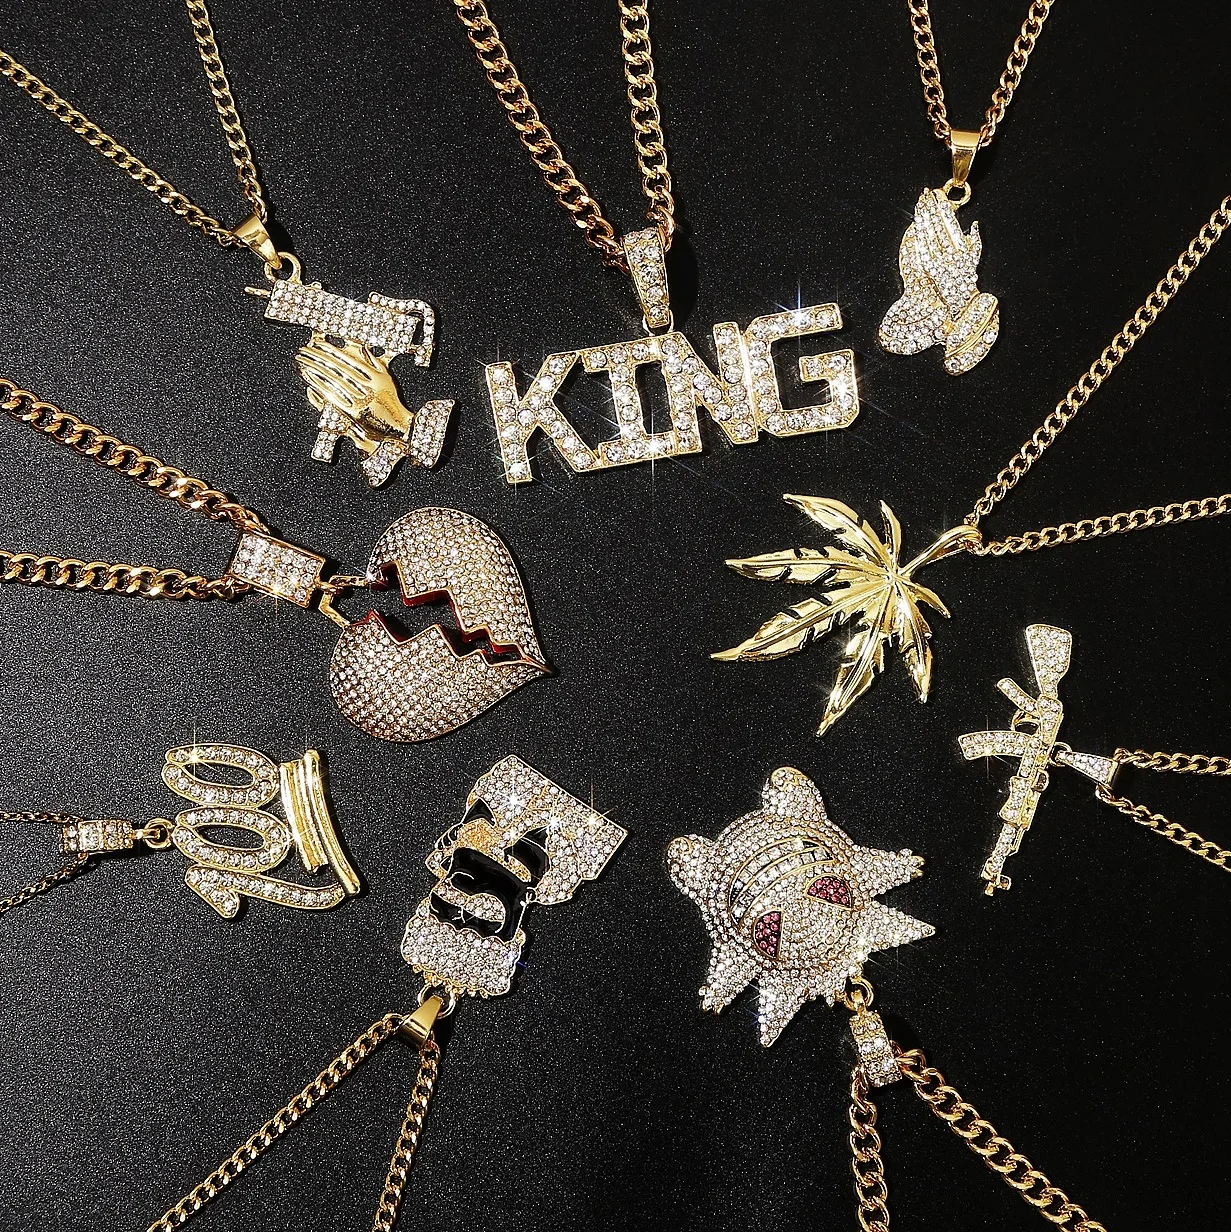 QIMING Exaggerated Hip Hop Punk Pendant Necklace For Women Men Full Crystal Zircon King Boss Gun Vintage Jewelry